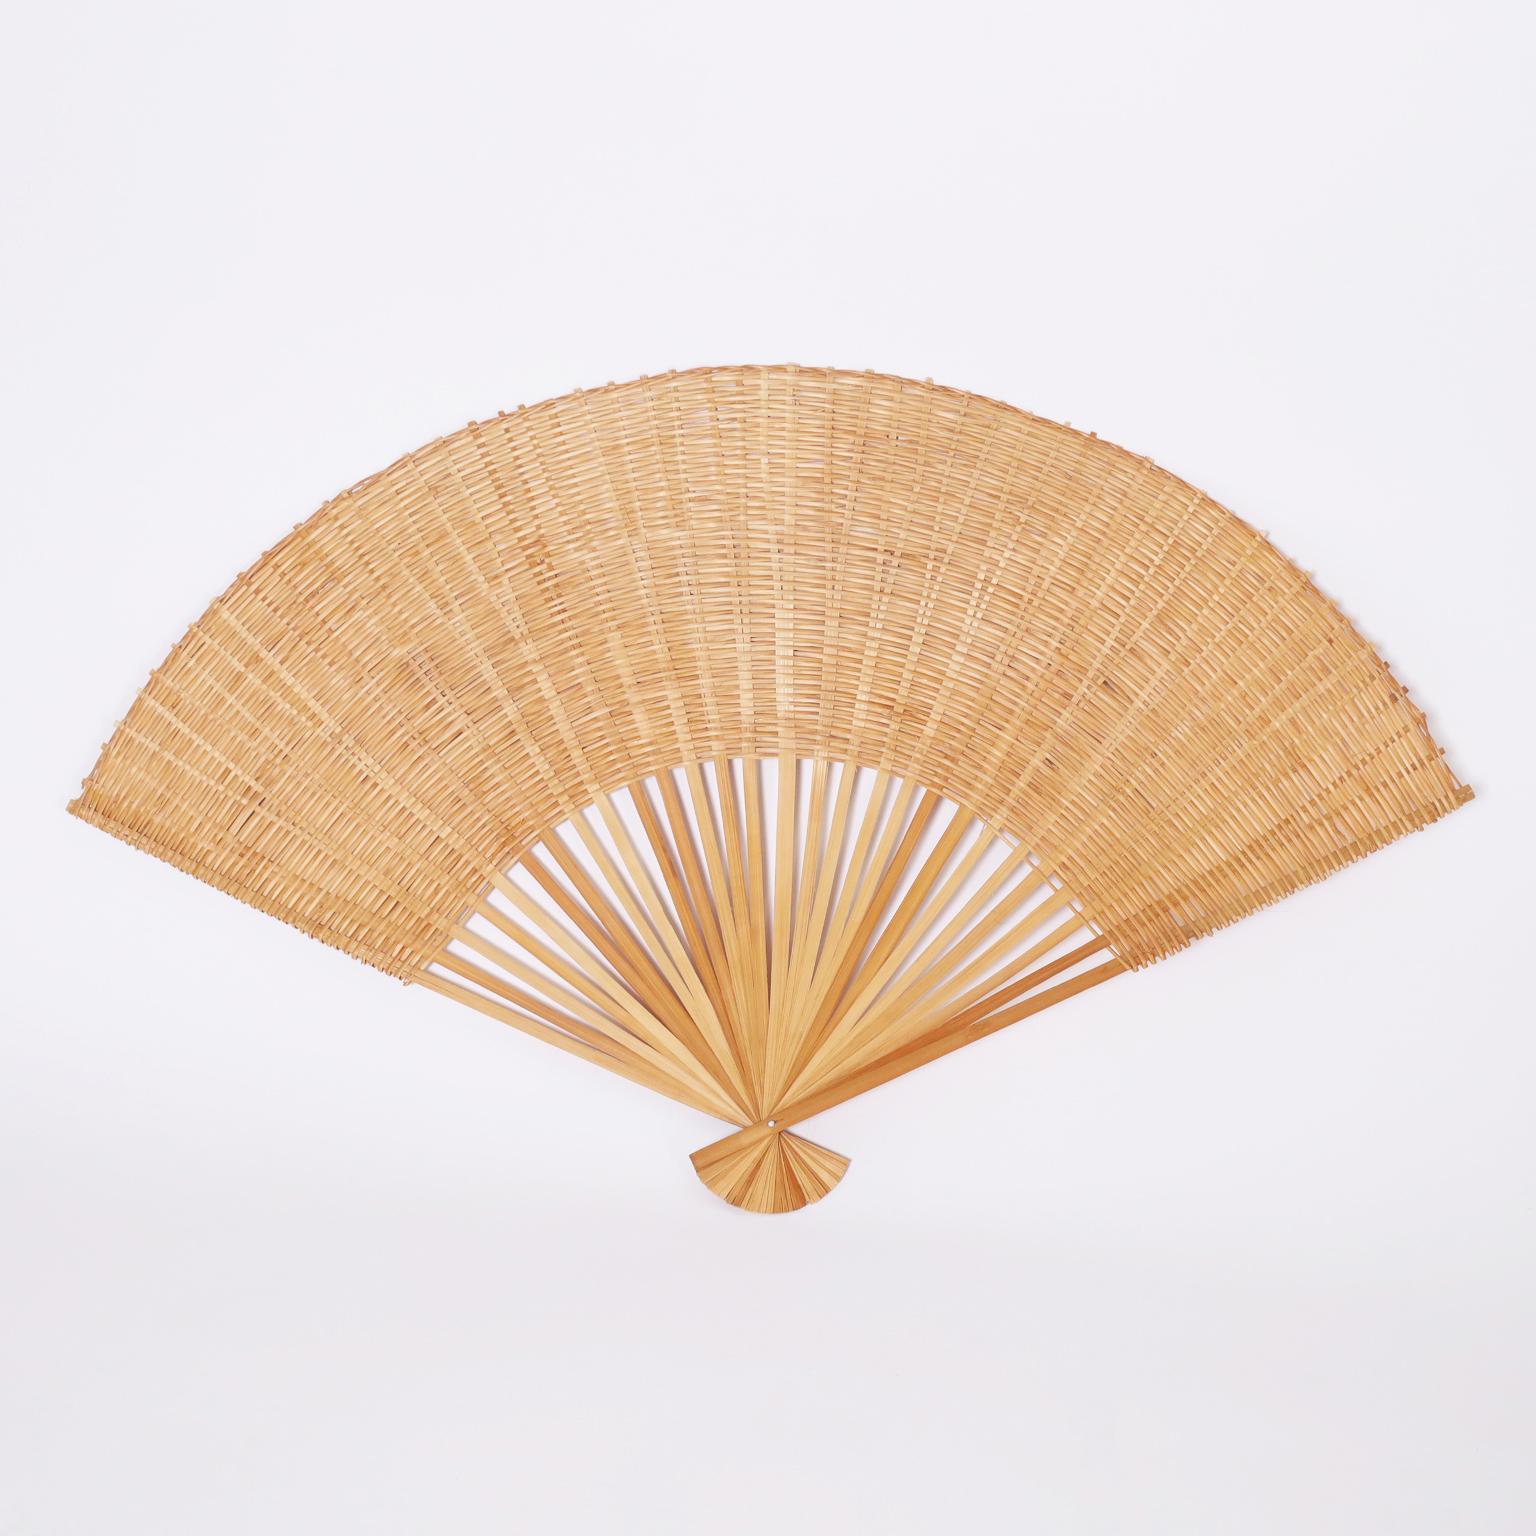 Unusual pair of vintage fans with plenty of decorative appeal hand crafted with stick wicker leaves over rattan ribs.